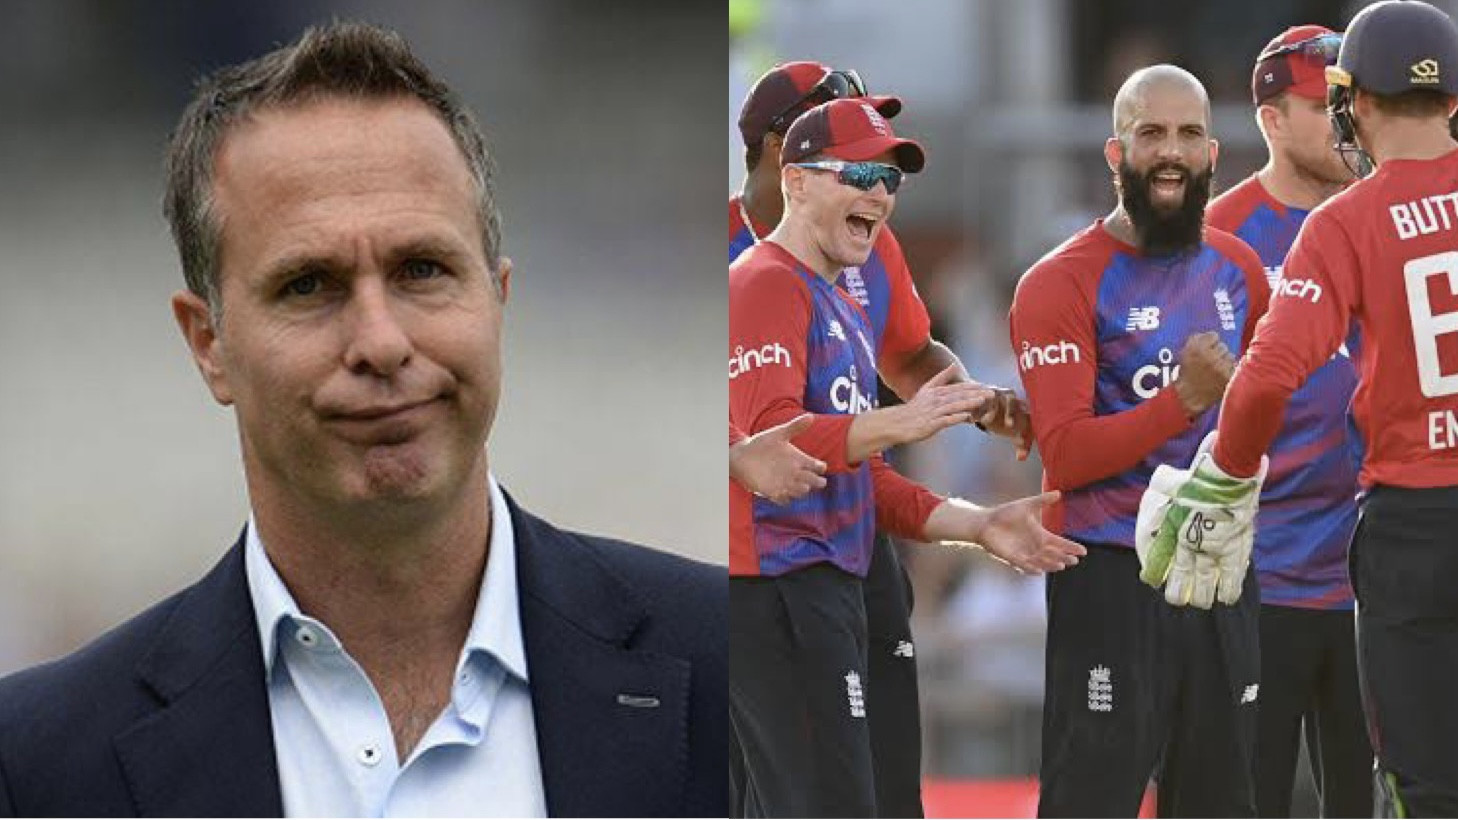 T20 World Cup 2021: England needs to maximize first 6 overs - Vaughan; suggests change in batting order 